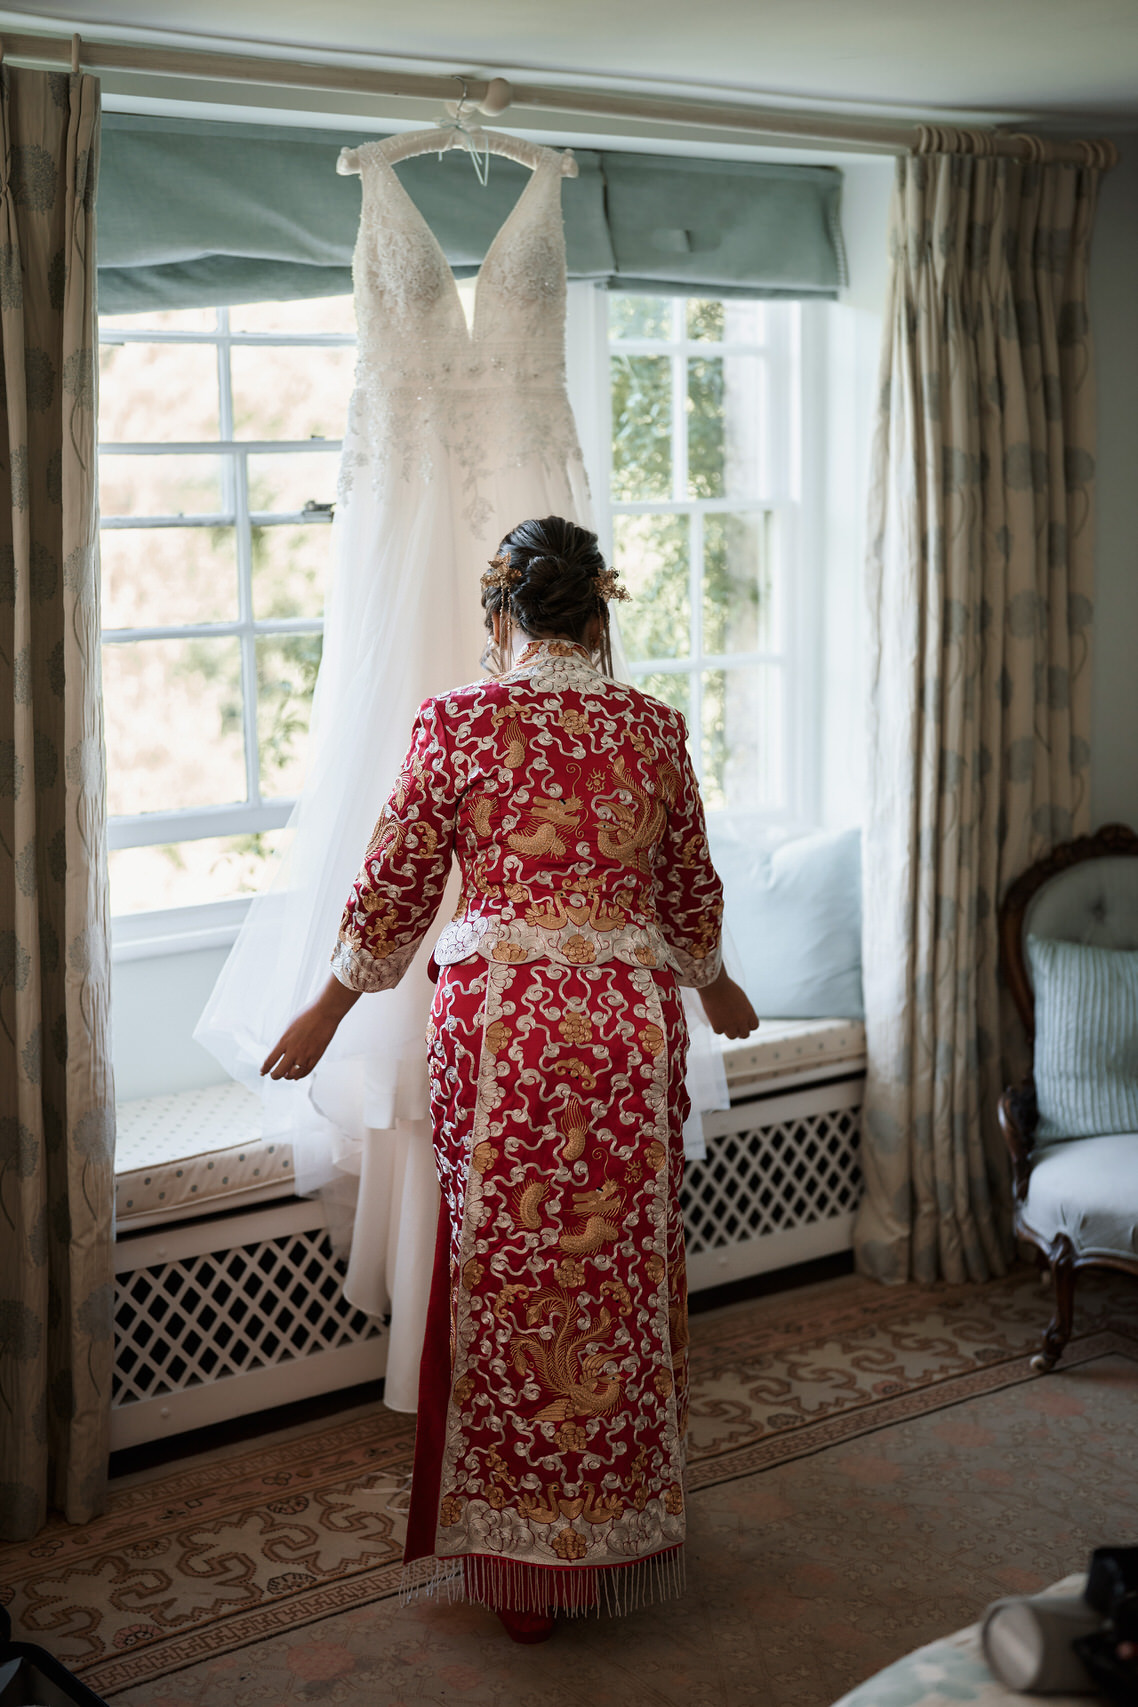 A lady in a Chinese outfit is checking out her bridal gown.